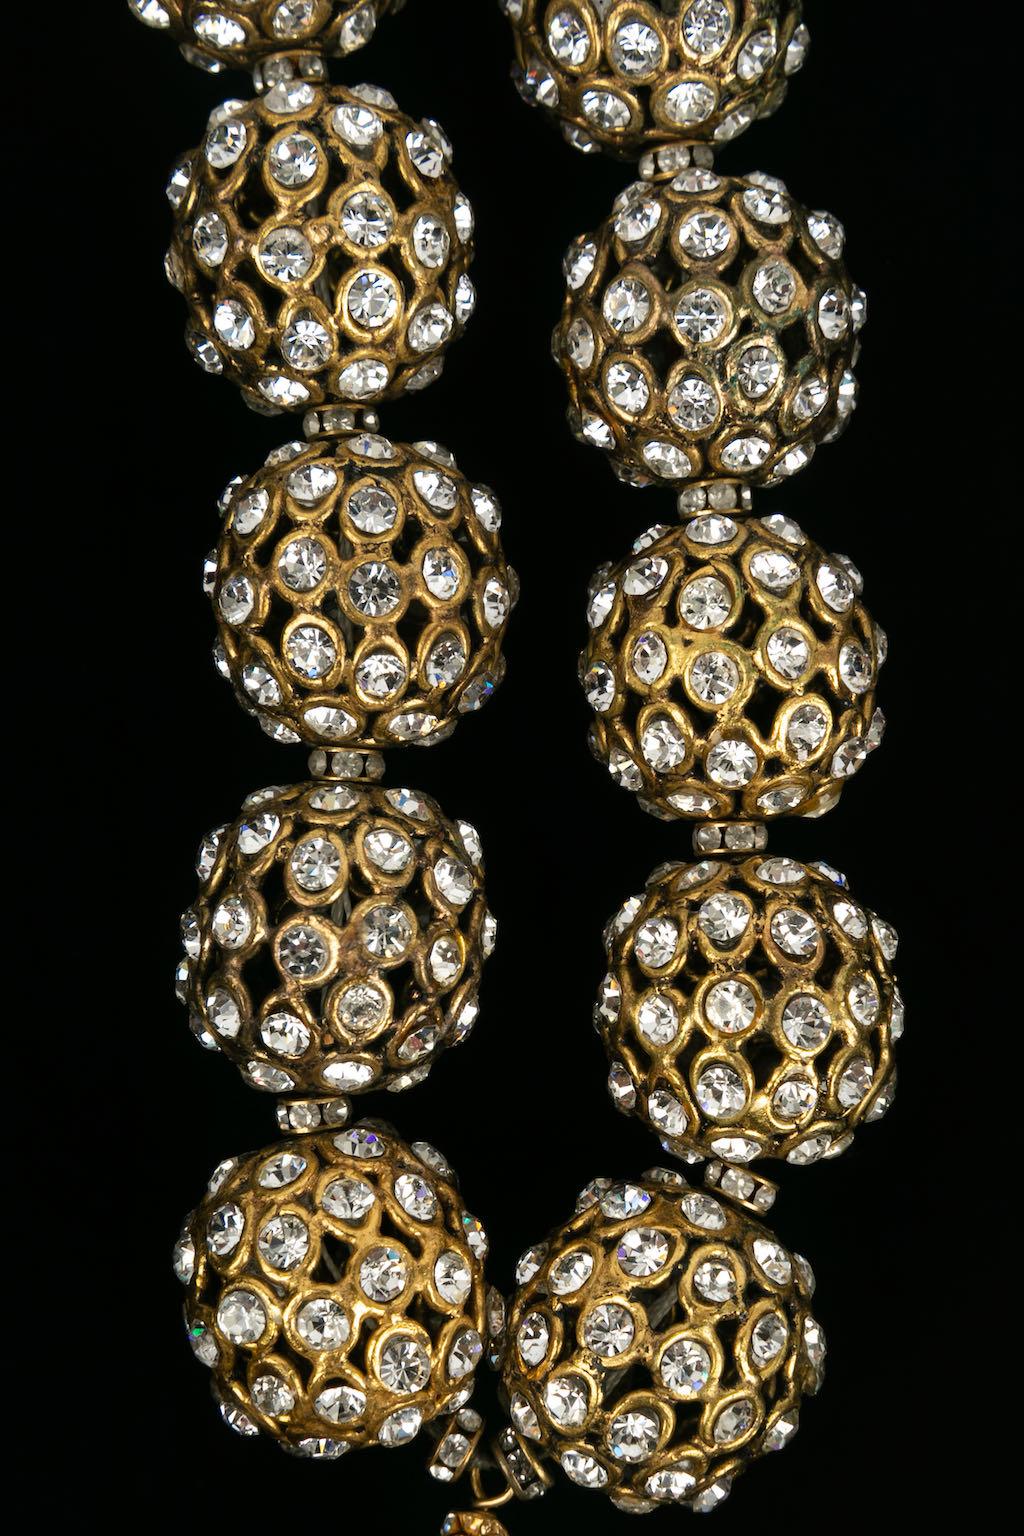 Women's Chanel Short Necklace in Gold Metal Beads Paved with Rhinestones For Sale